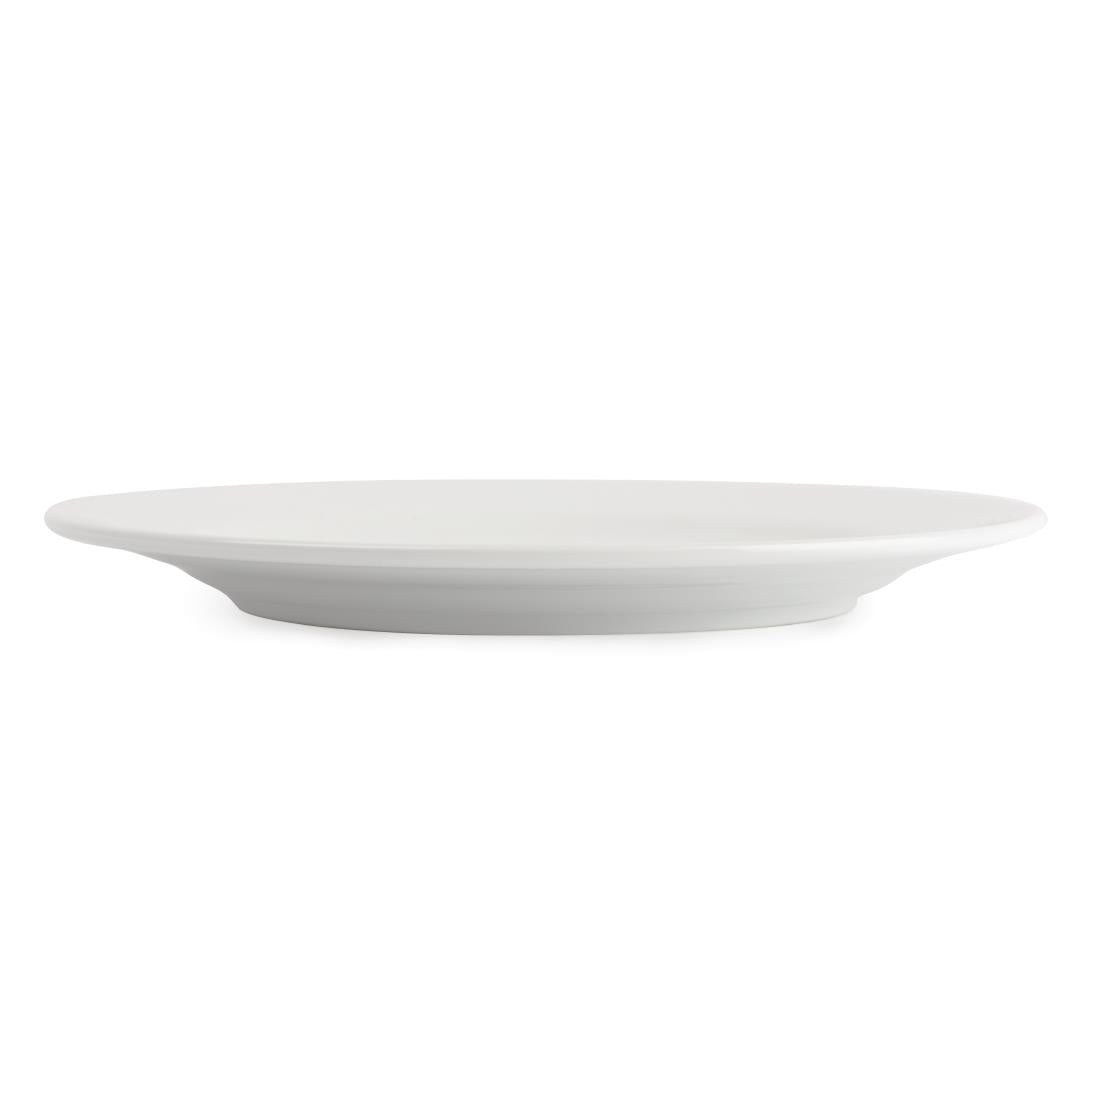 CG007 Royal Porcelain Classic White Wide Rim Plates 210mm (Pack of 12)